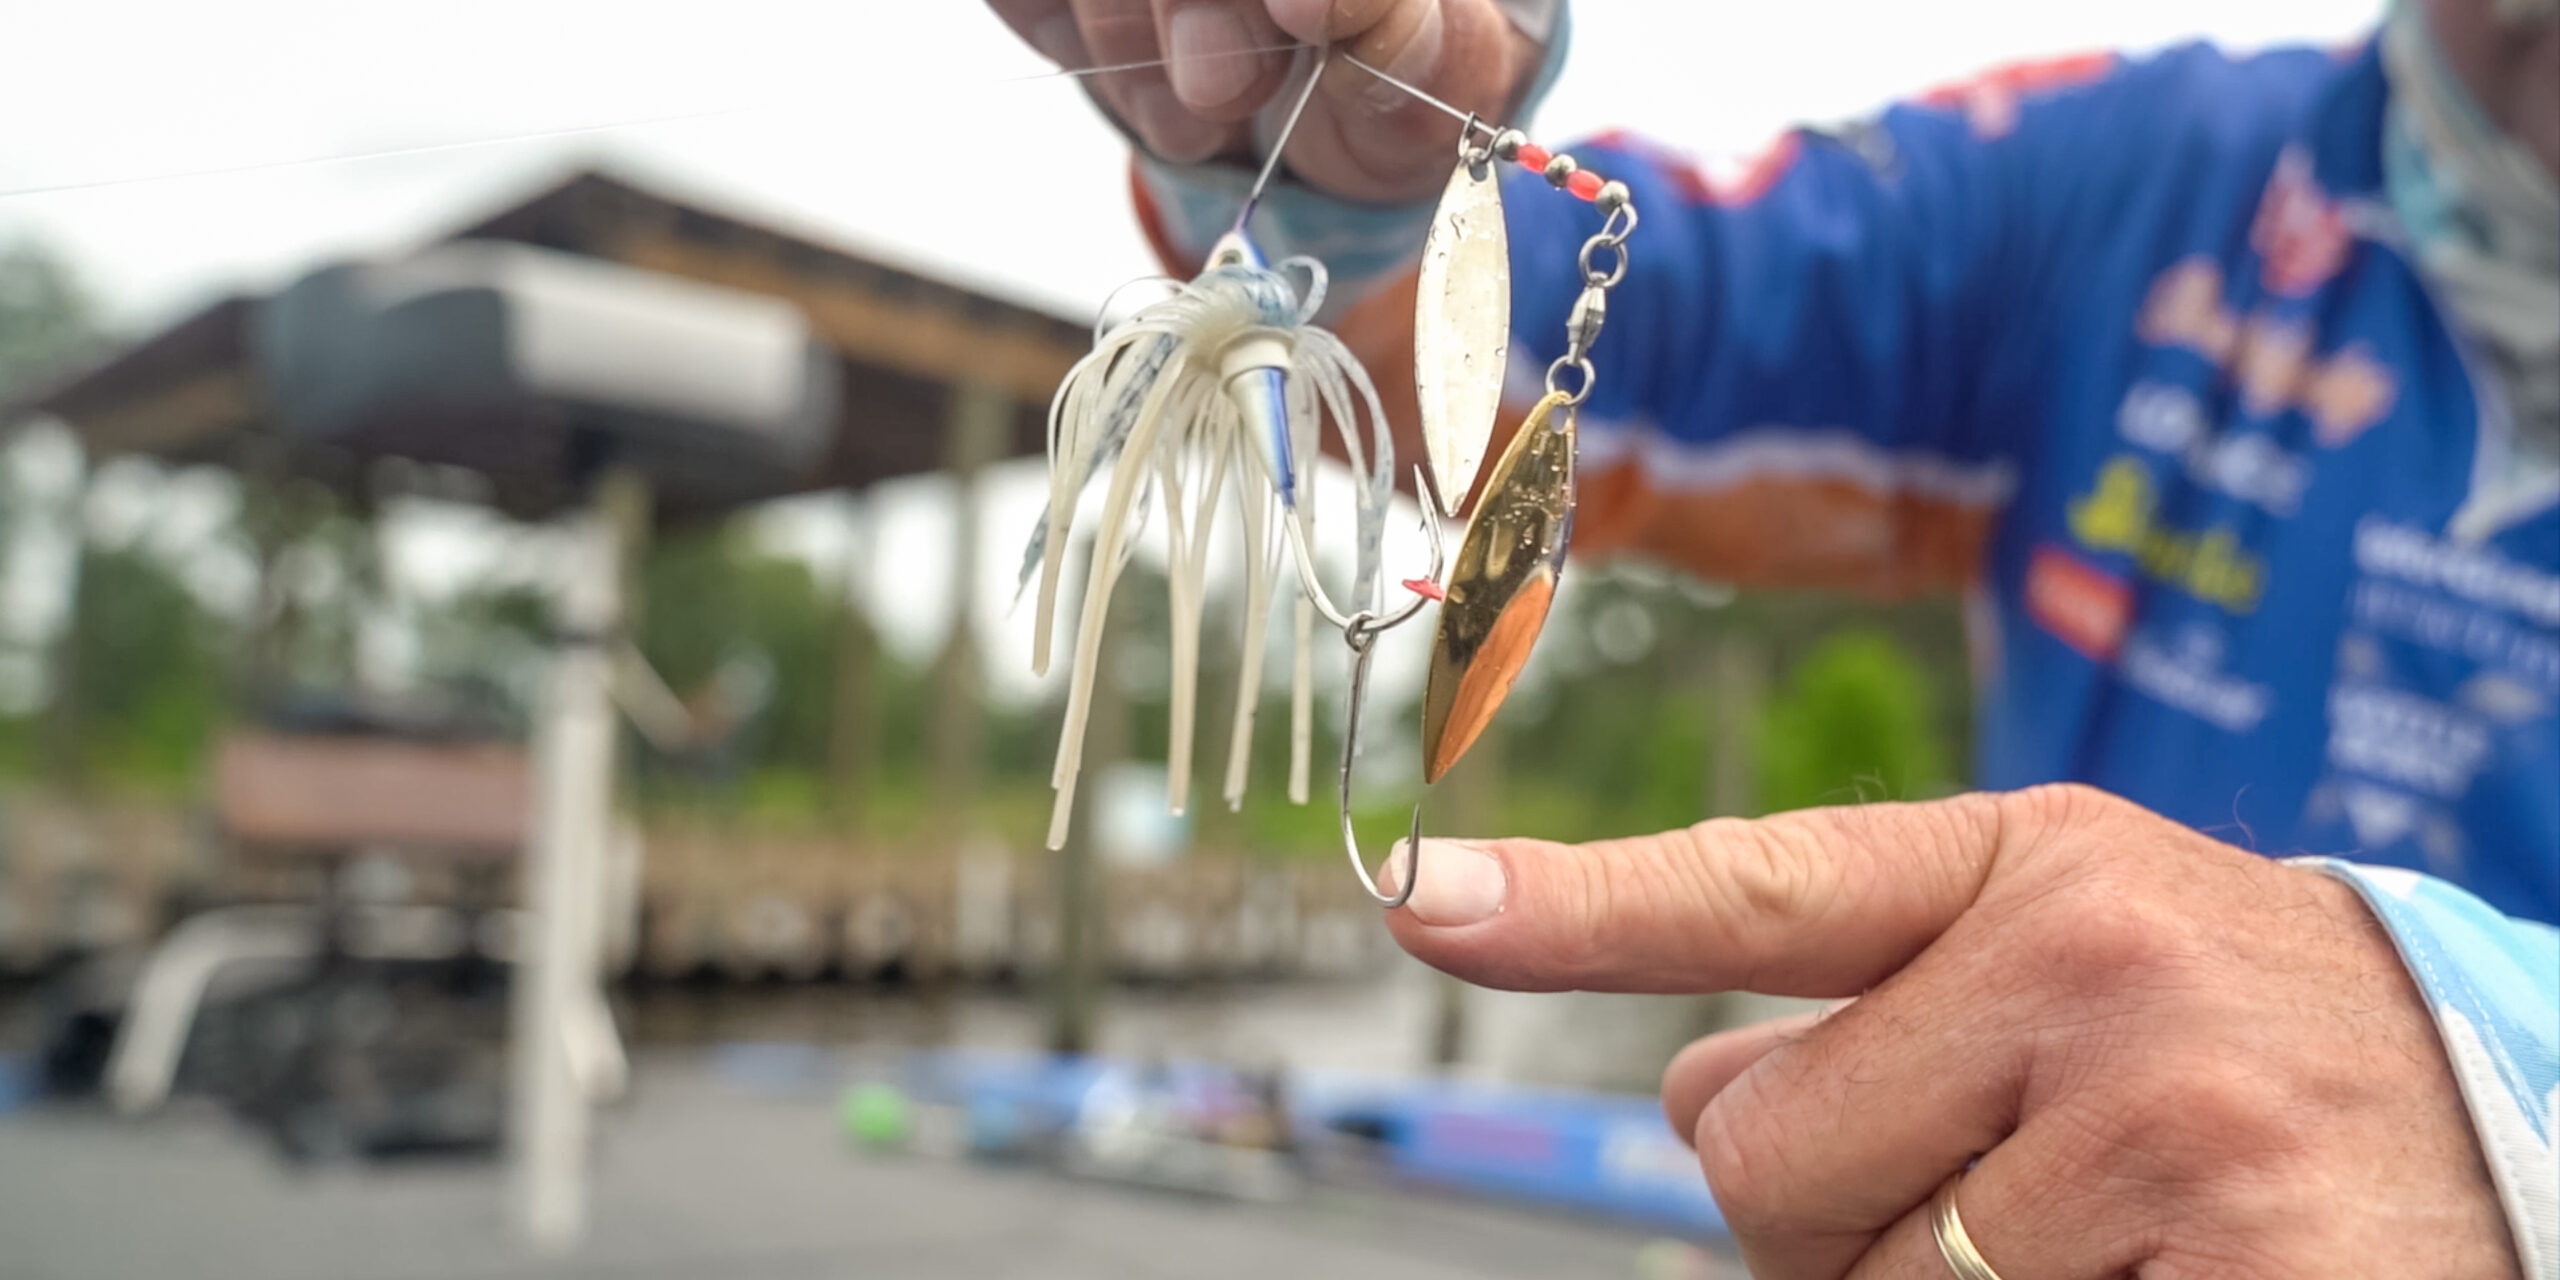 Trailer hooks are essential on spinnerbaits according to Shaw Grigsby